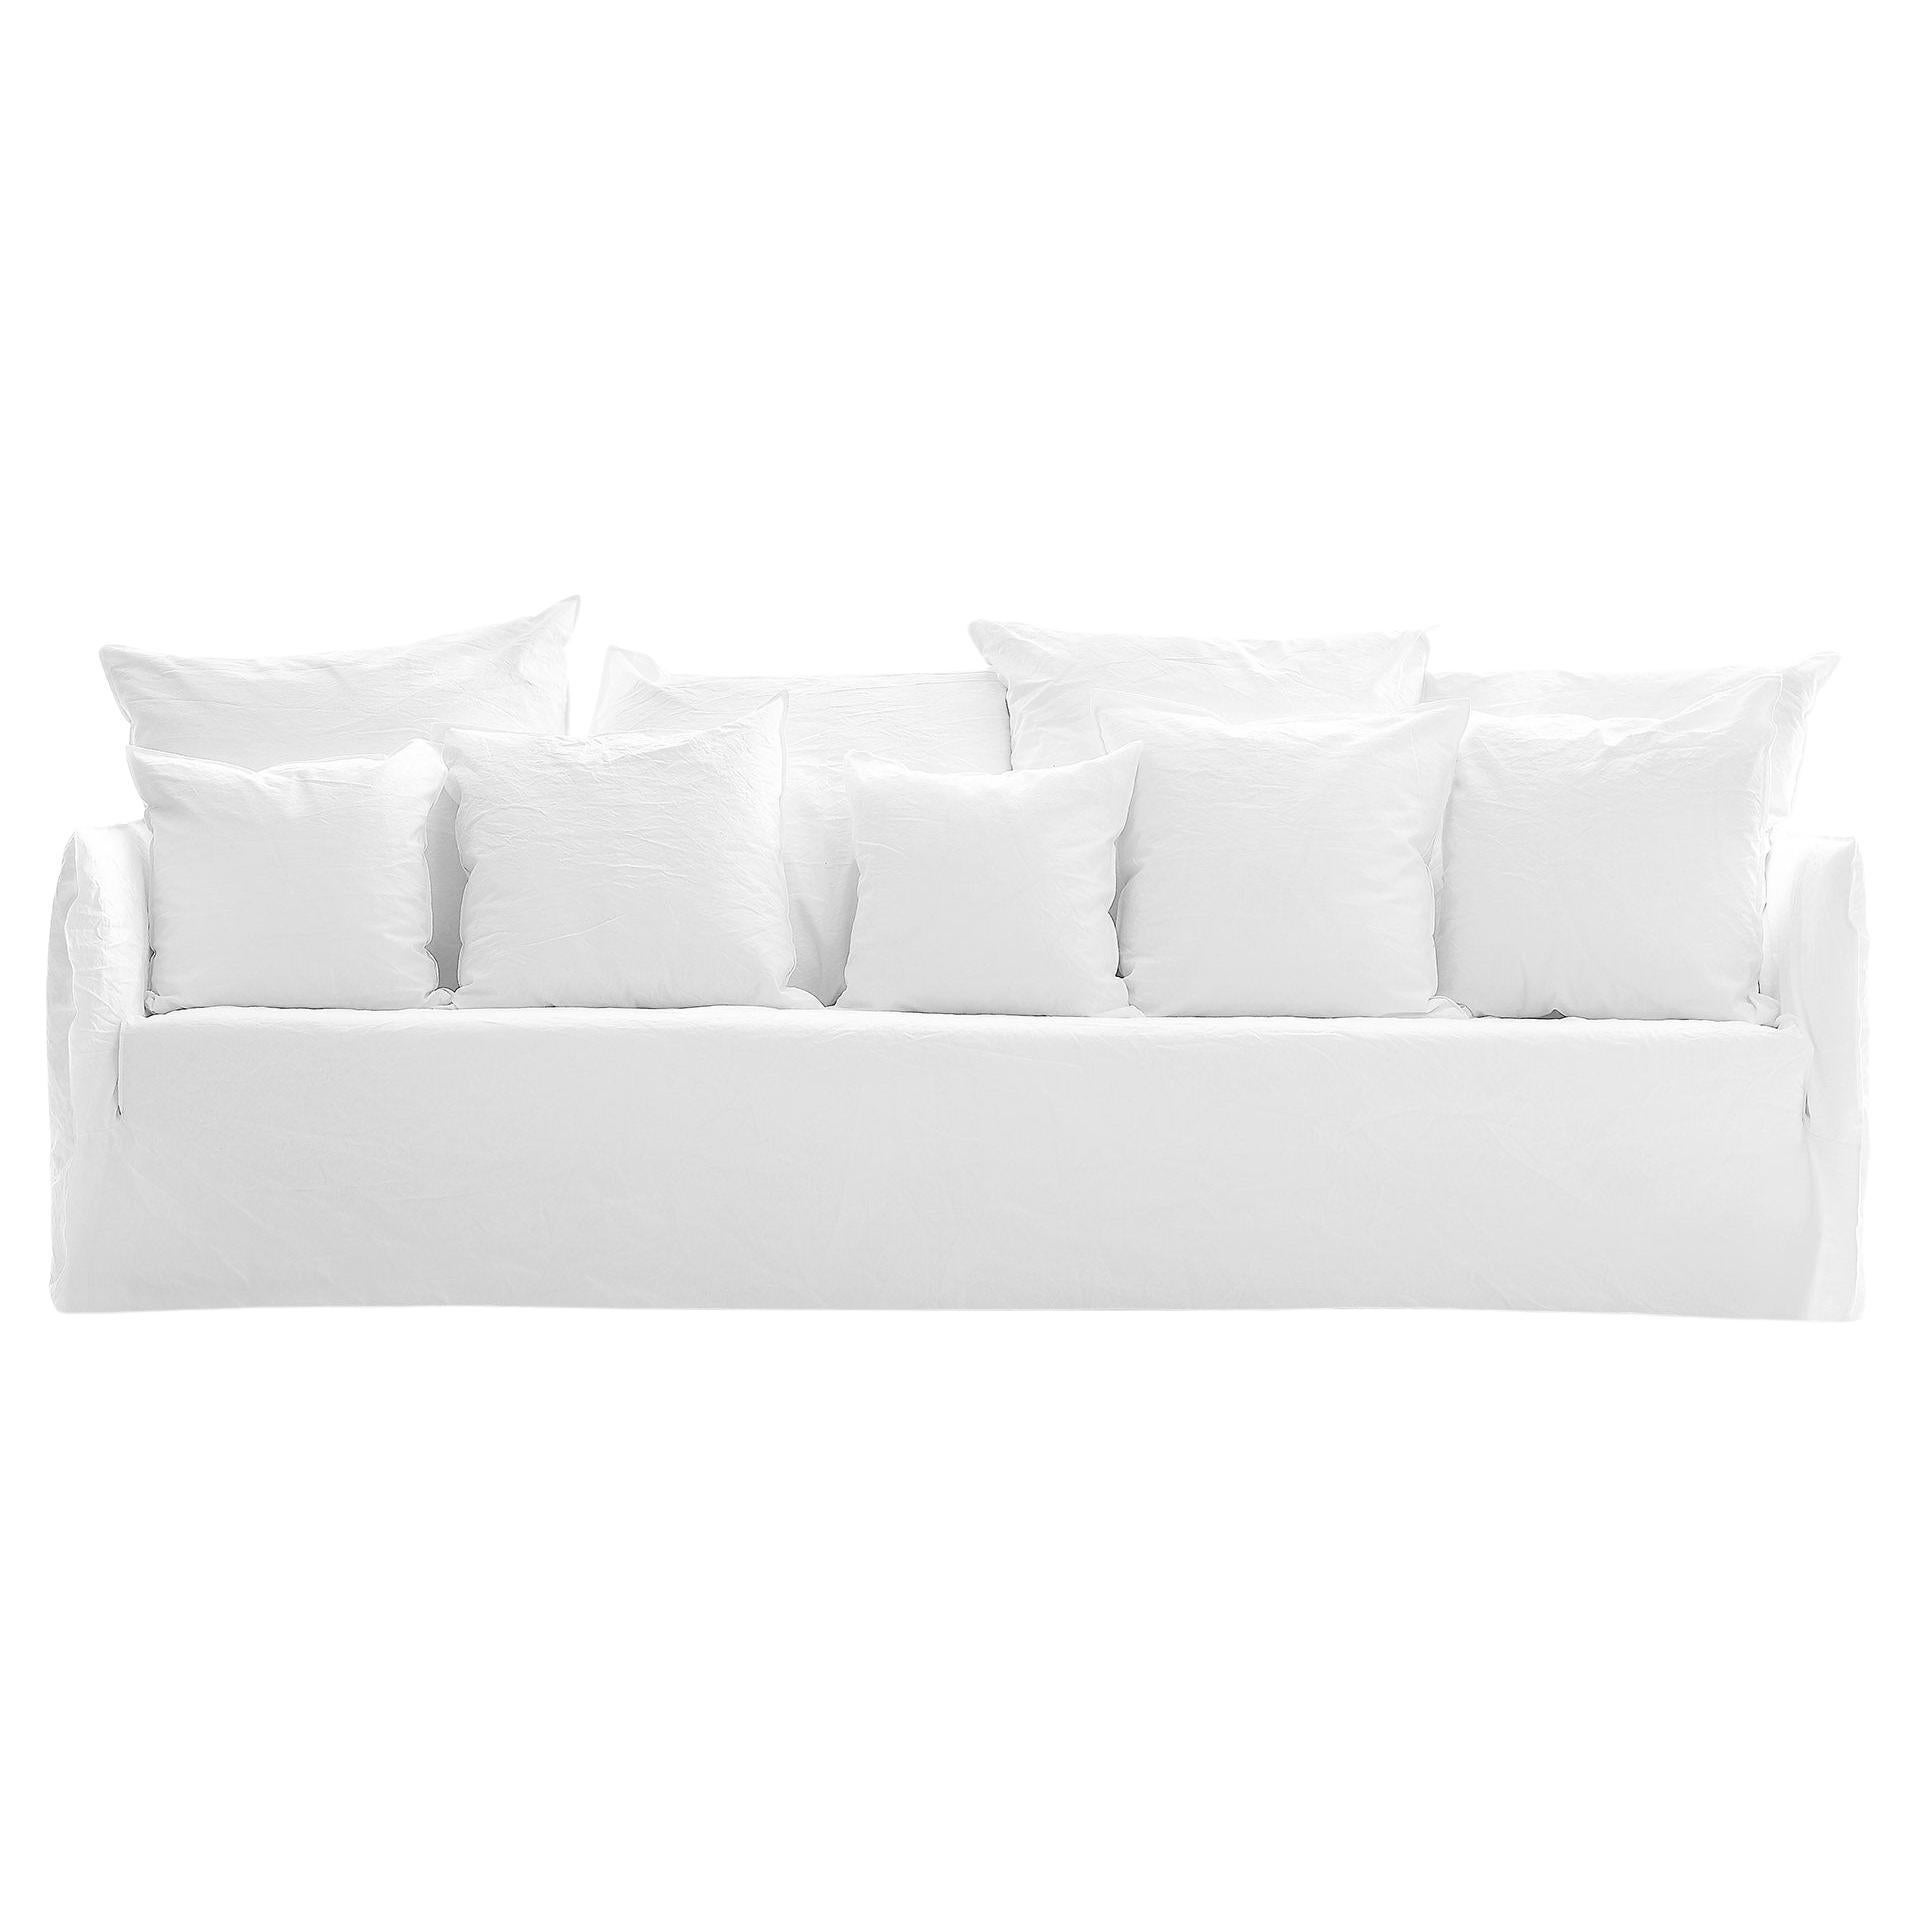 Gervasoni Ghost 114 Sofa in White Linen Upholstery by Paola Navone For Sale